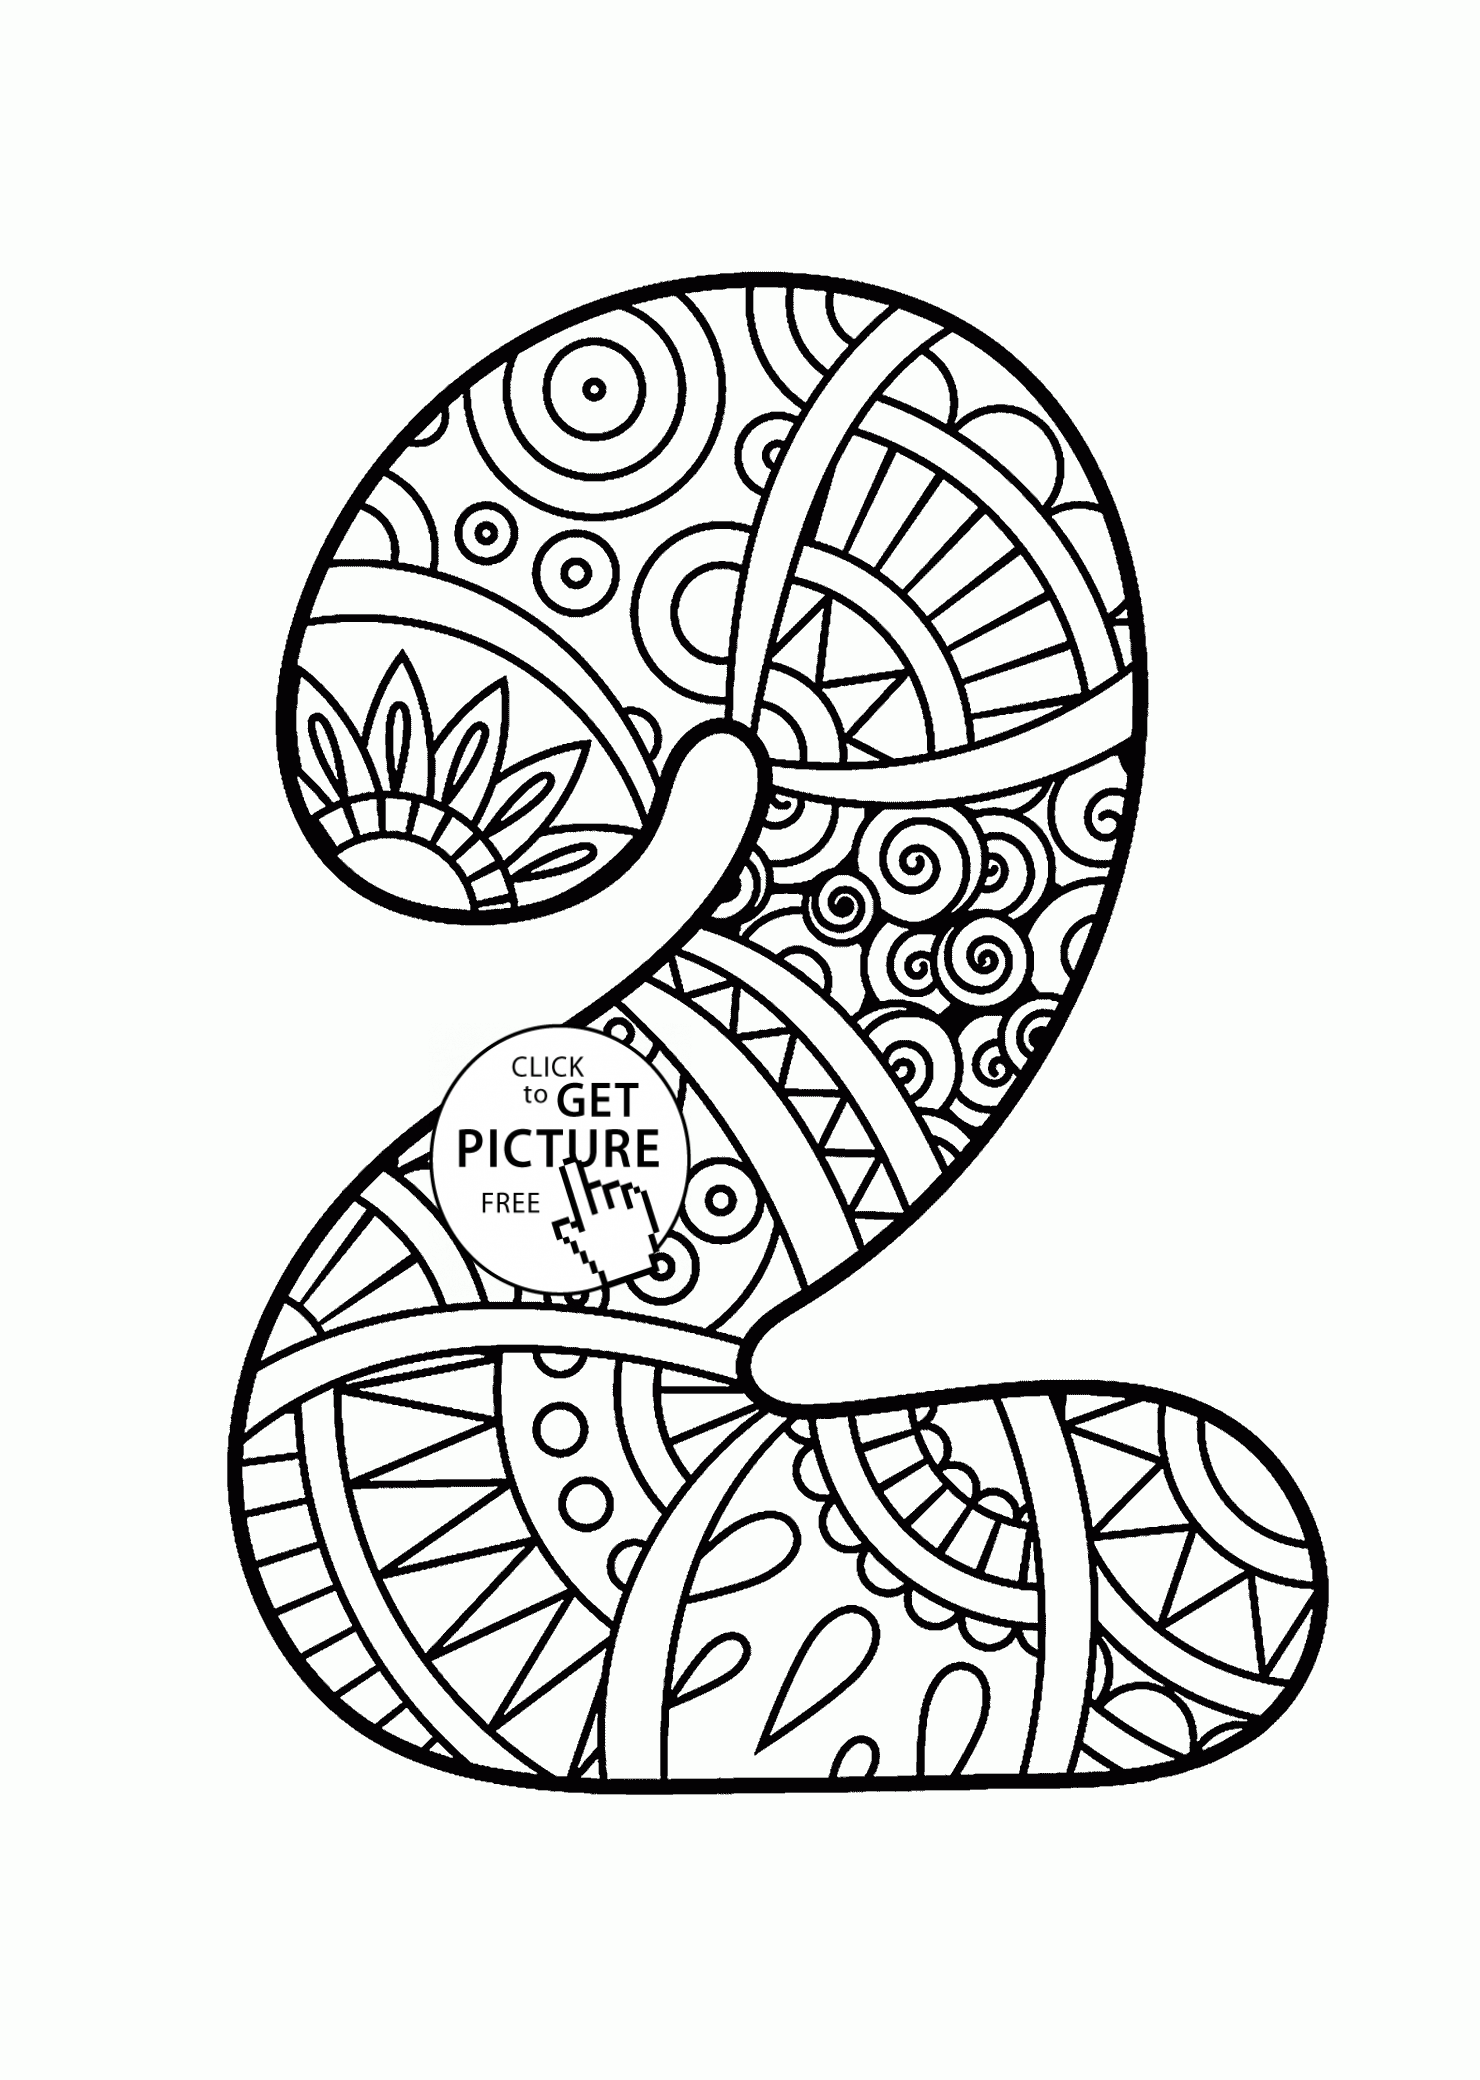 Pattern Number 2 coloring pages for kids, counting numbers ...